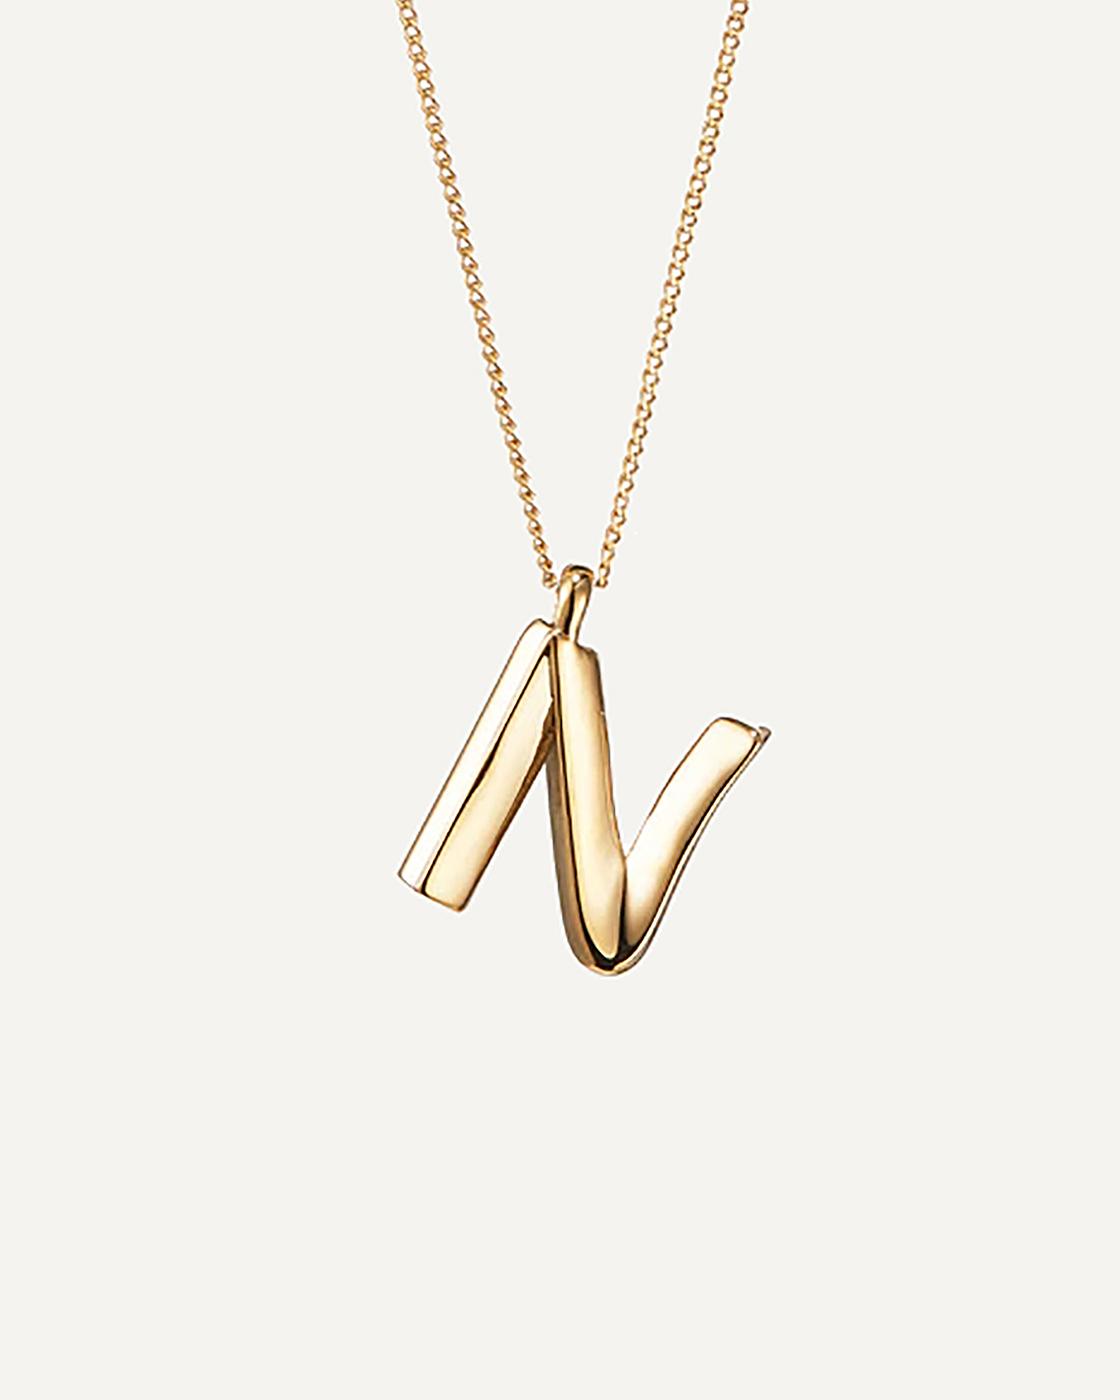 Up to 4 Initial Bird Initial Necklace